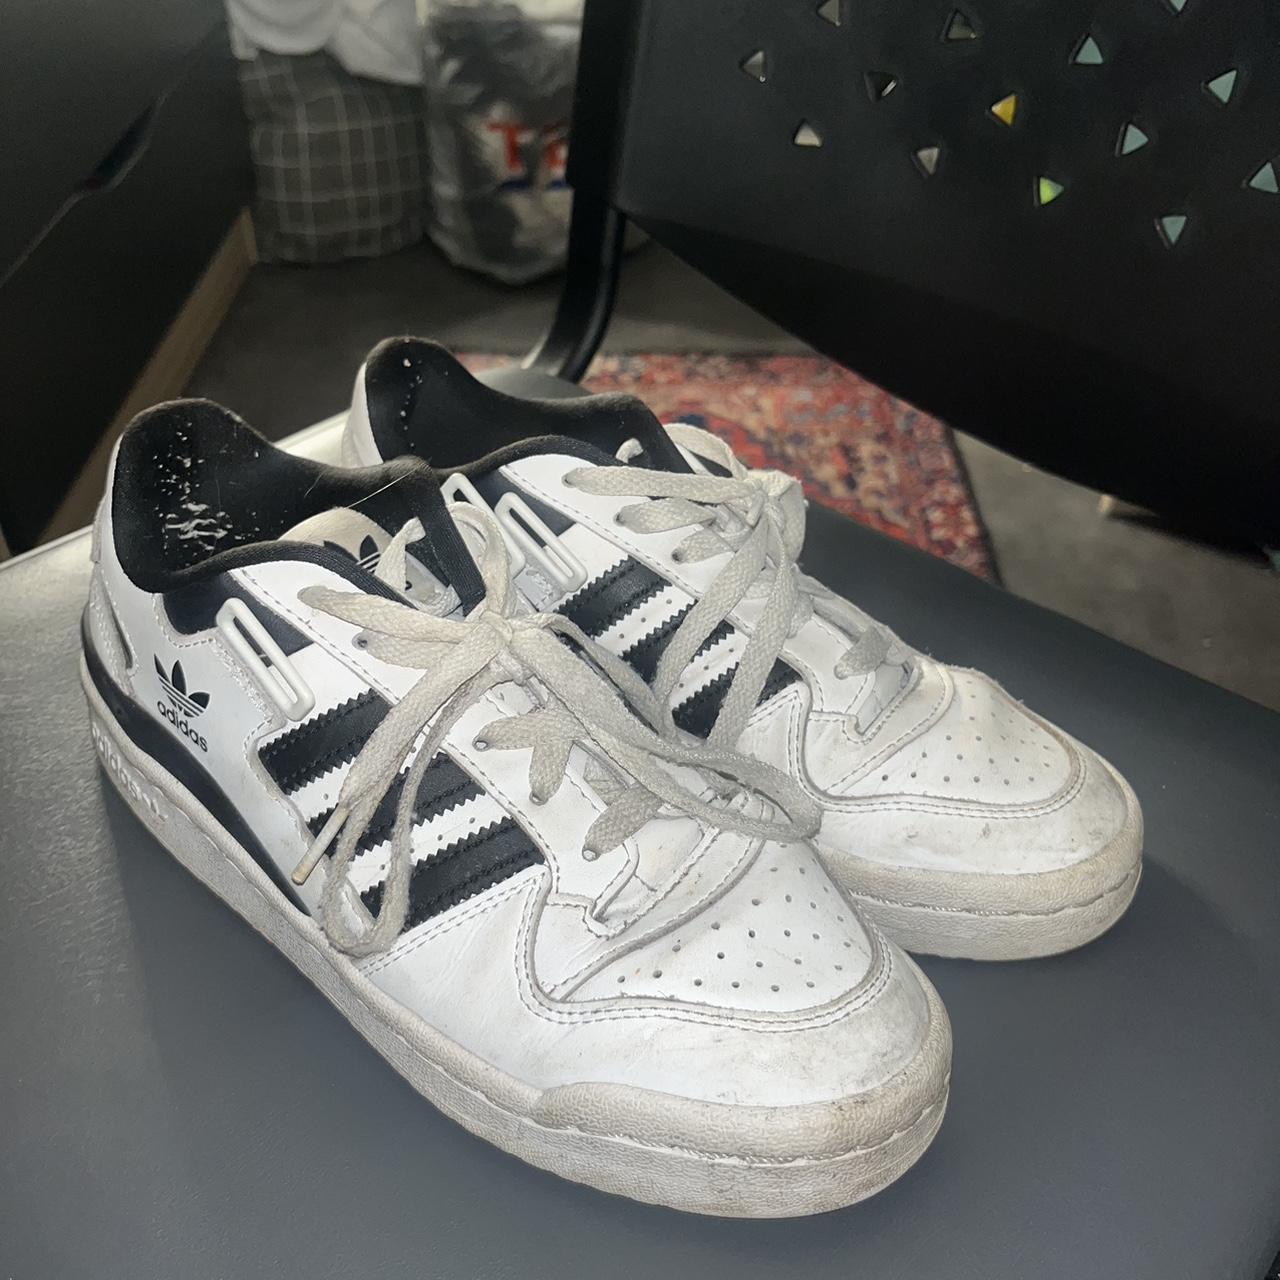 adidas forum lows in black and white size 4 and a half - Depop